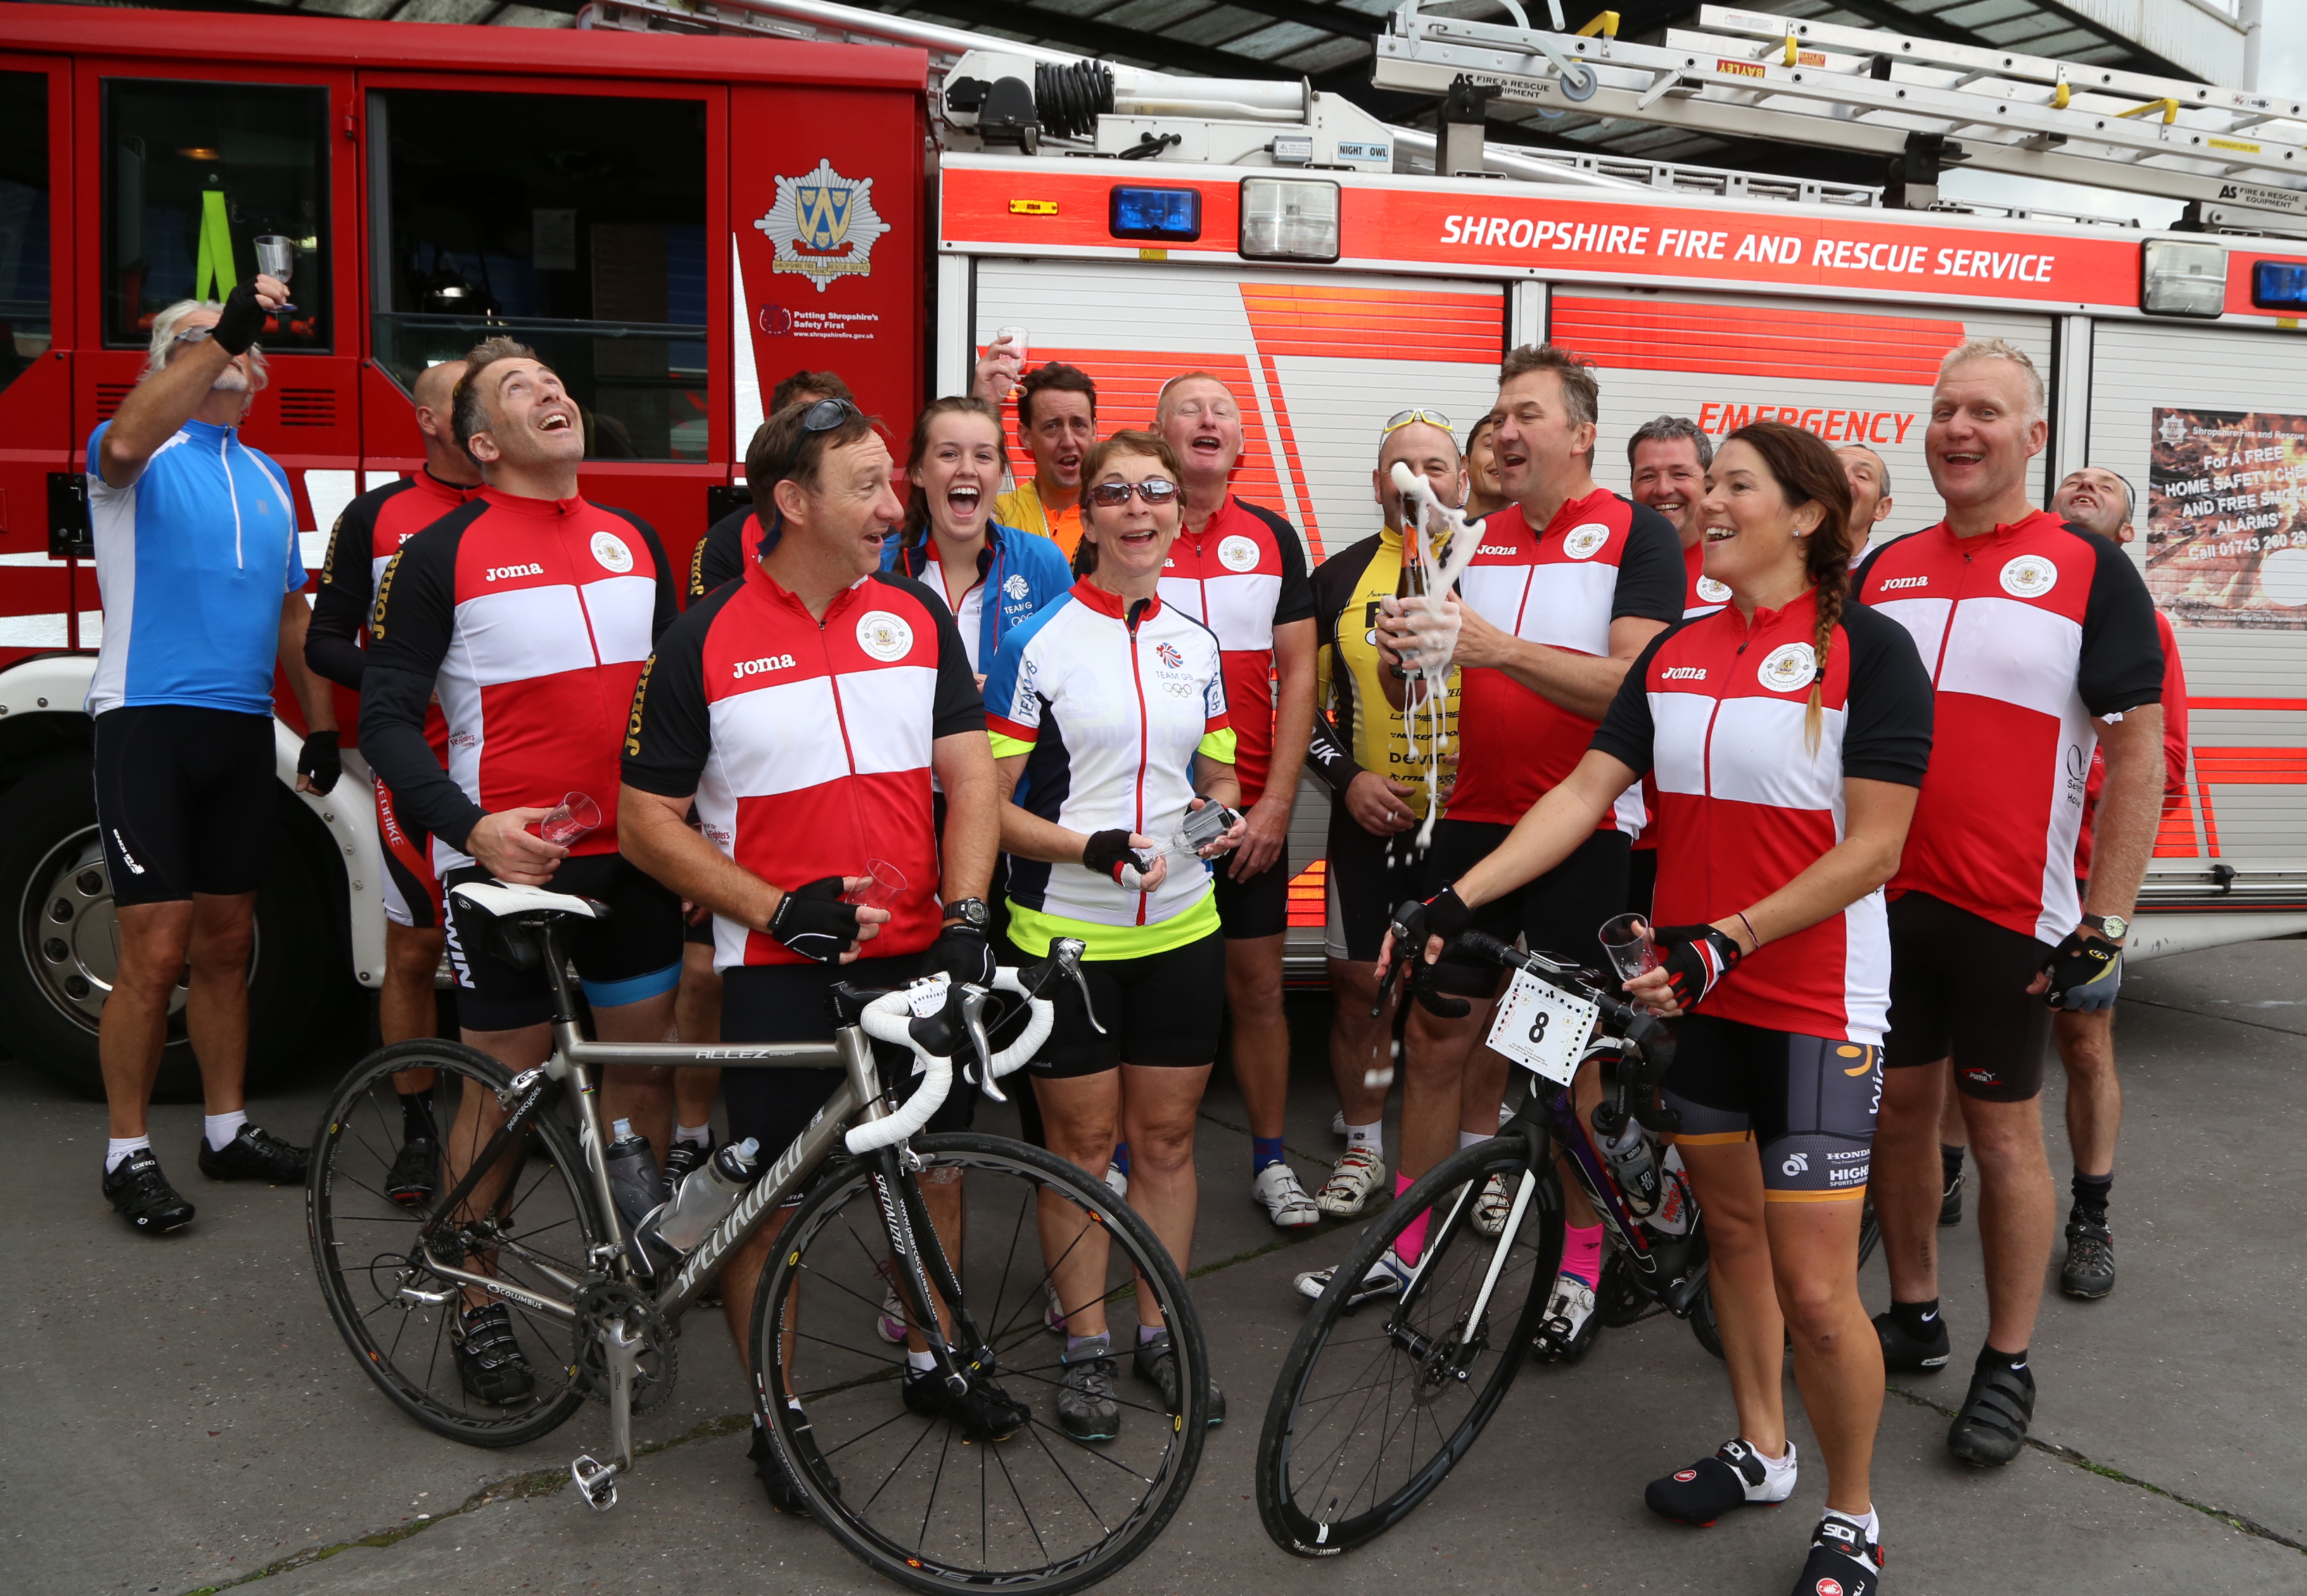 Champagne corks popped at the end of a marathon three day charity cycle ride in aid of The Severn Hospice and the Fire Fighters Charity by members of Shropshire Fire and Rescue Service.